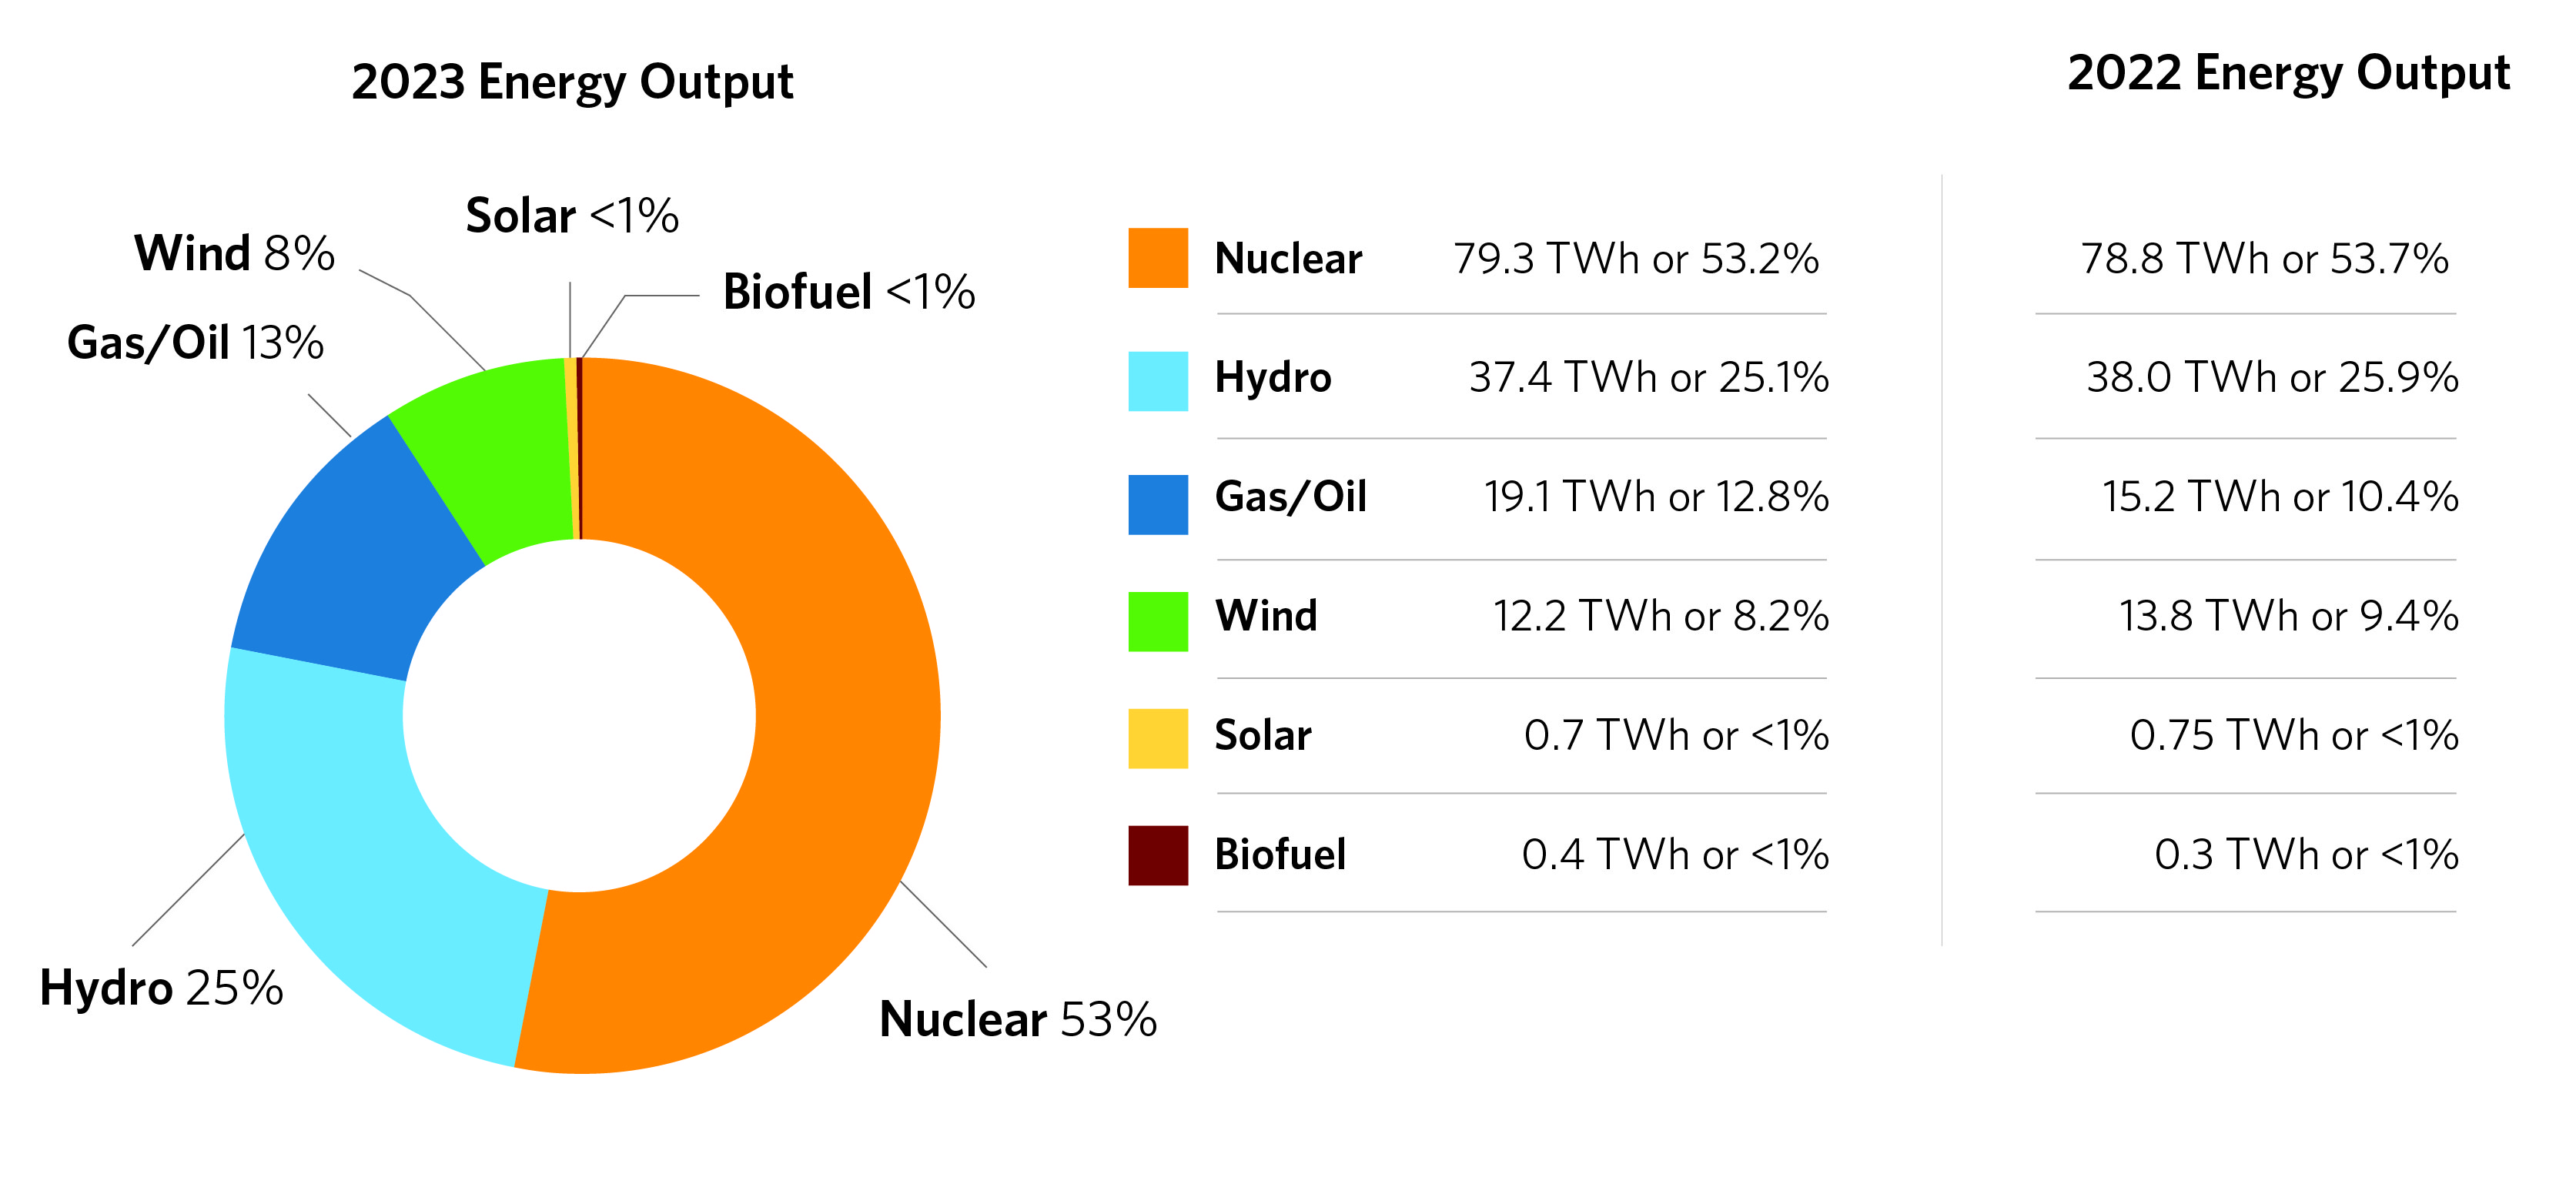 Donut chart displaying energy output by source for 2023